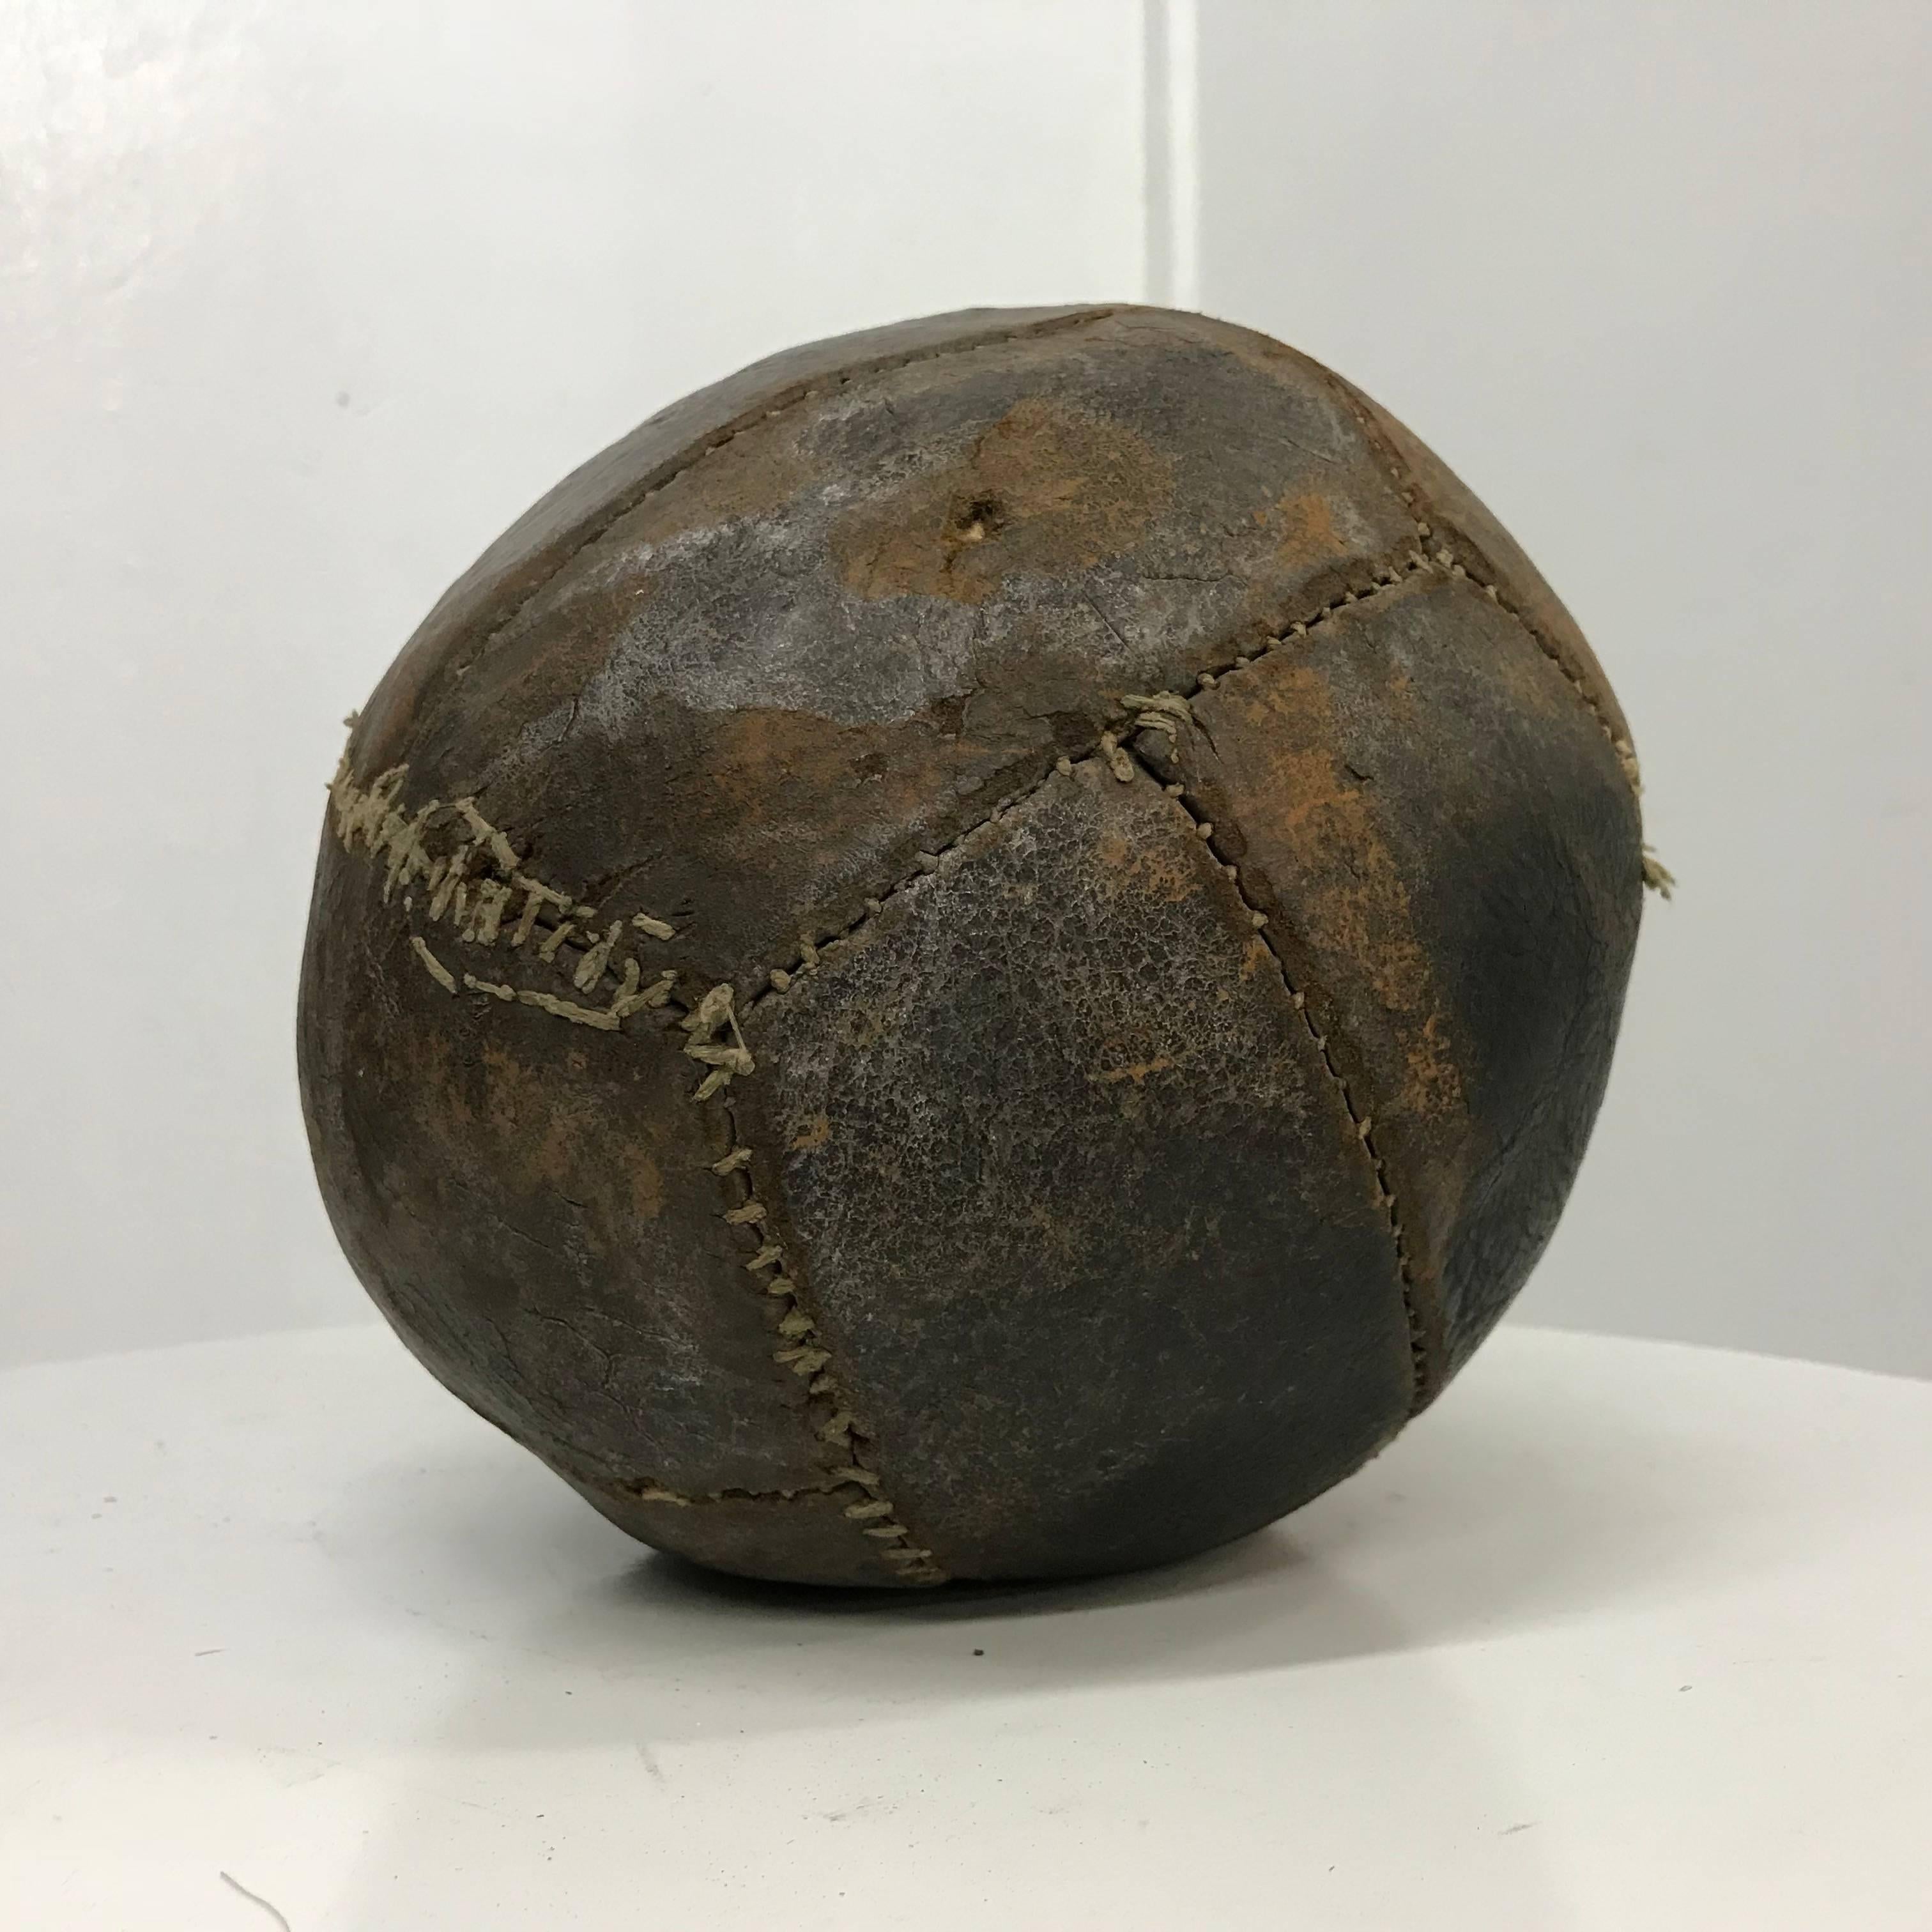 Industrial Antique Leather Medicine Ball with Great Vintage Patina